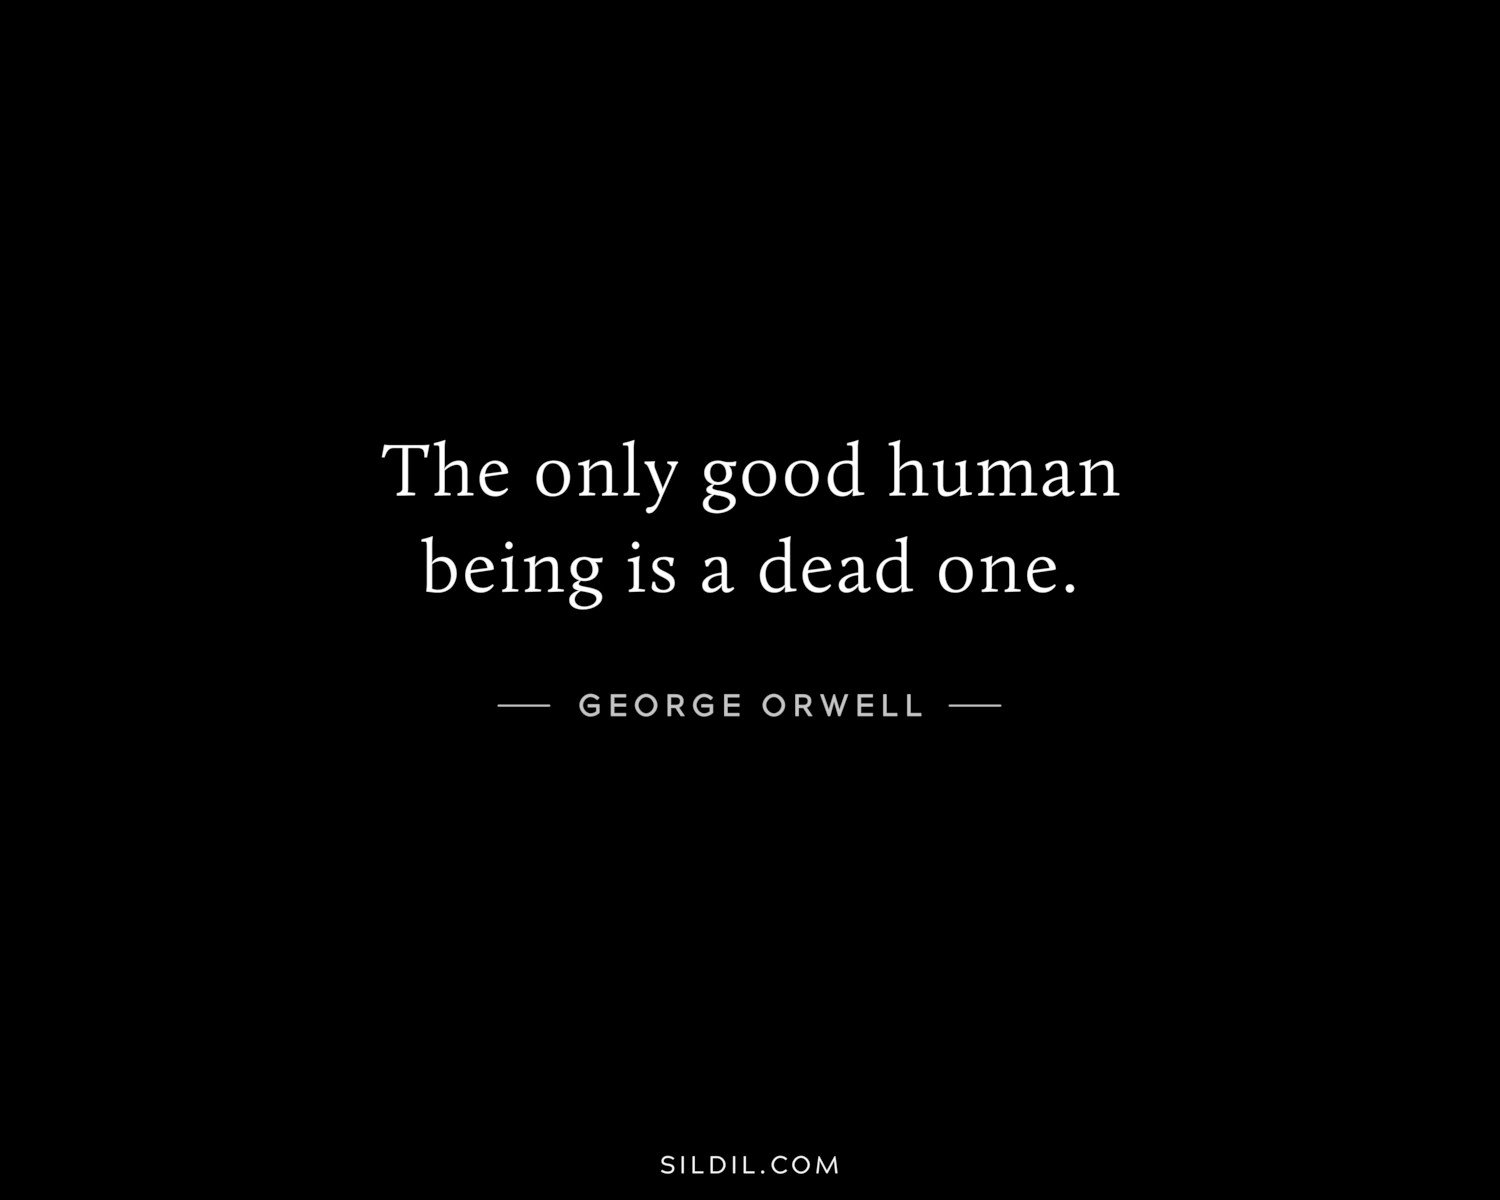 The only good human being is a dead one.